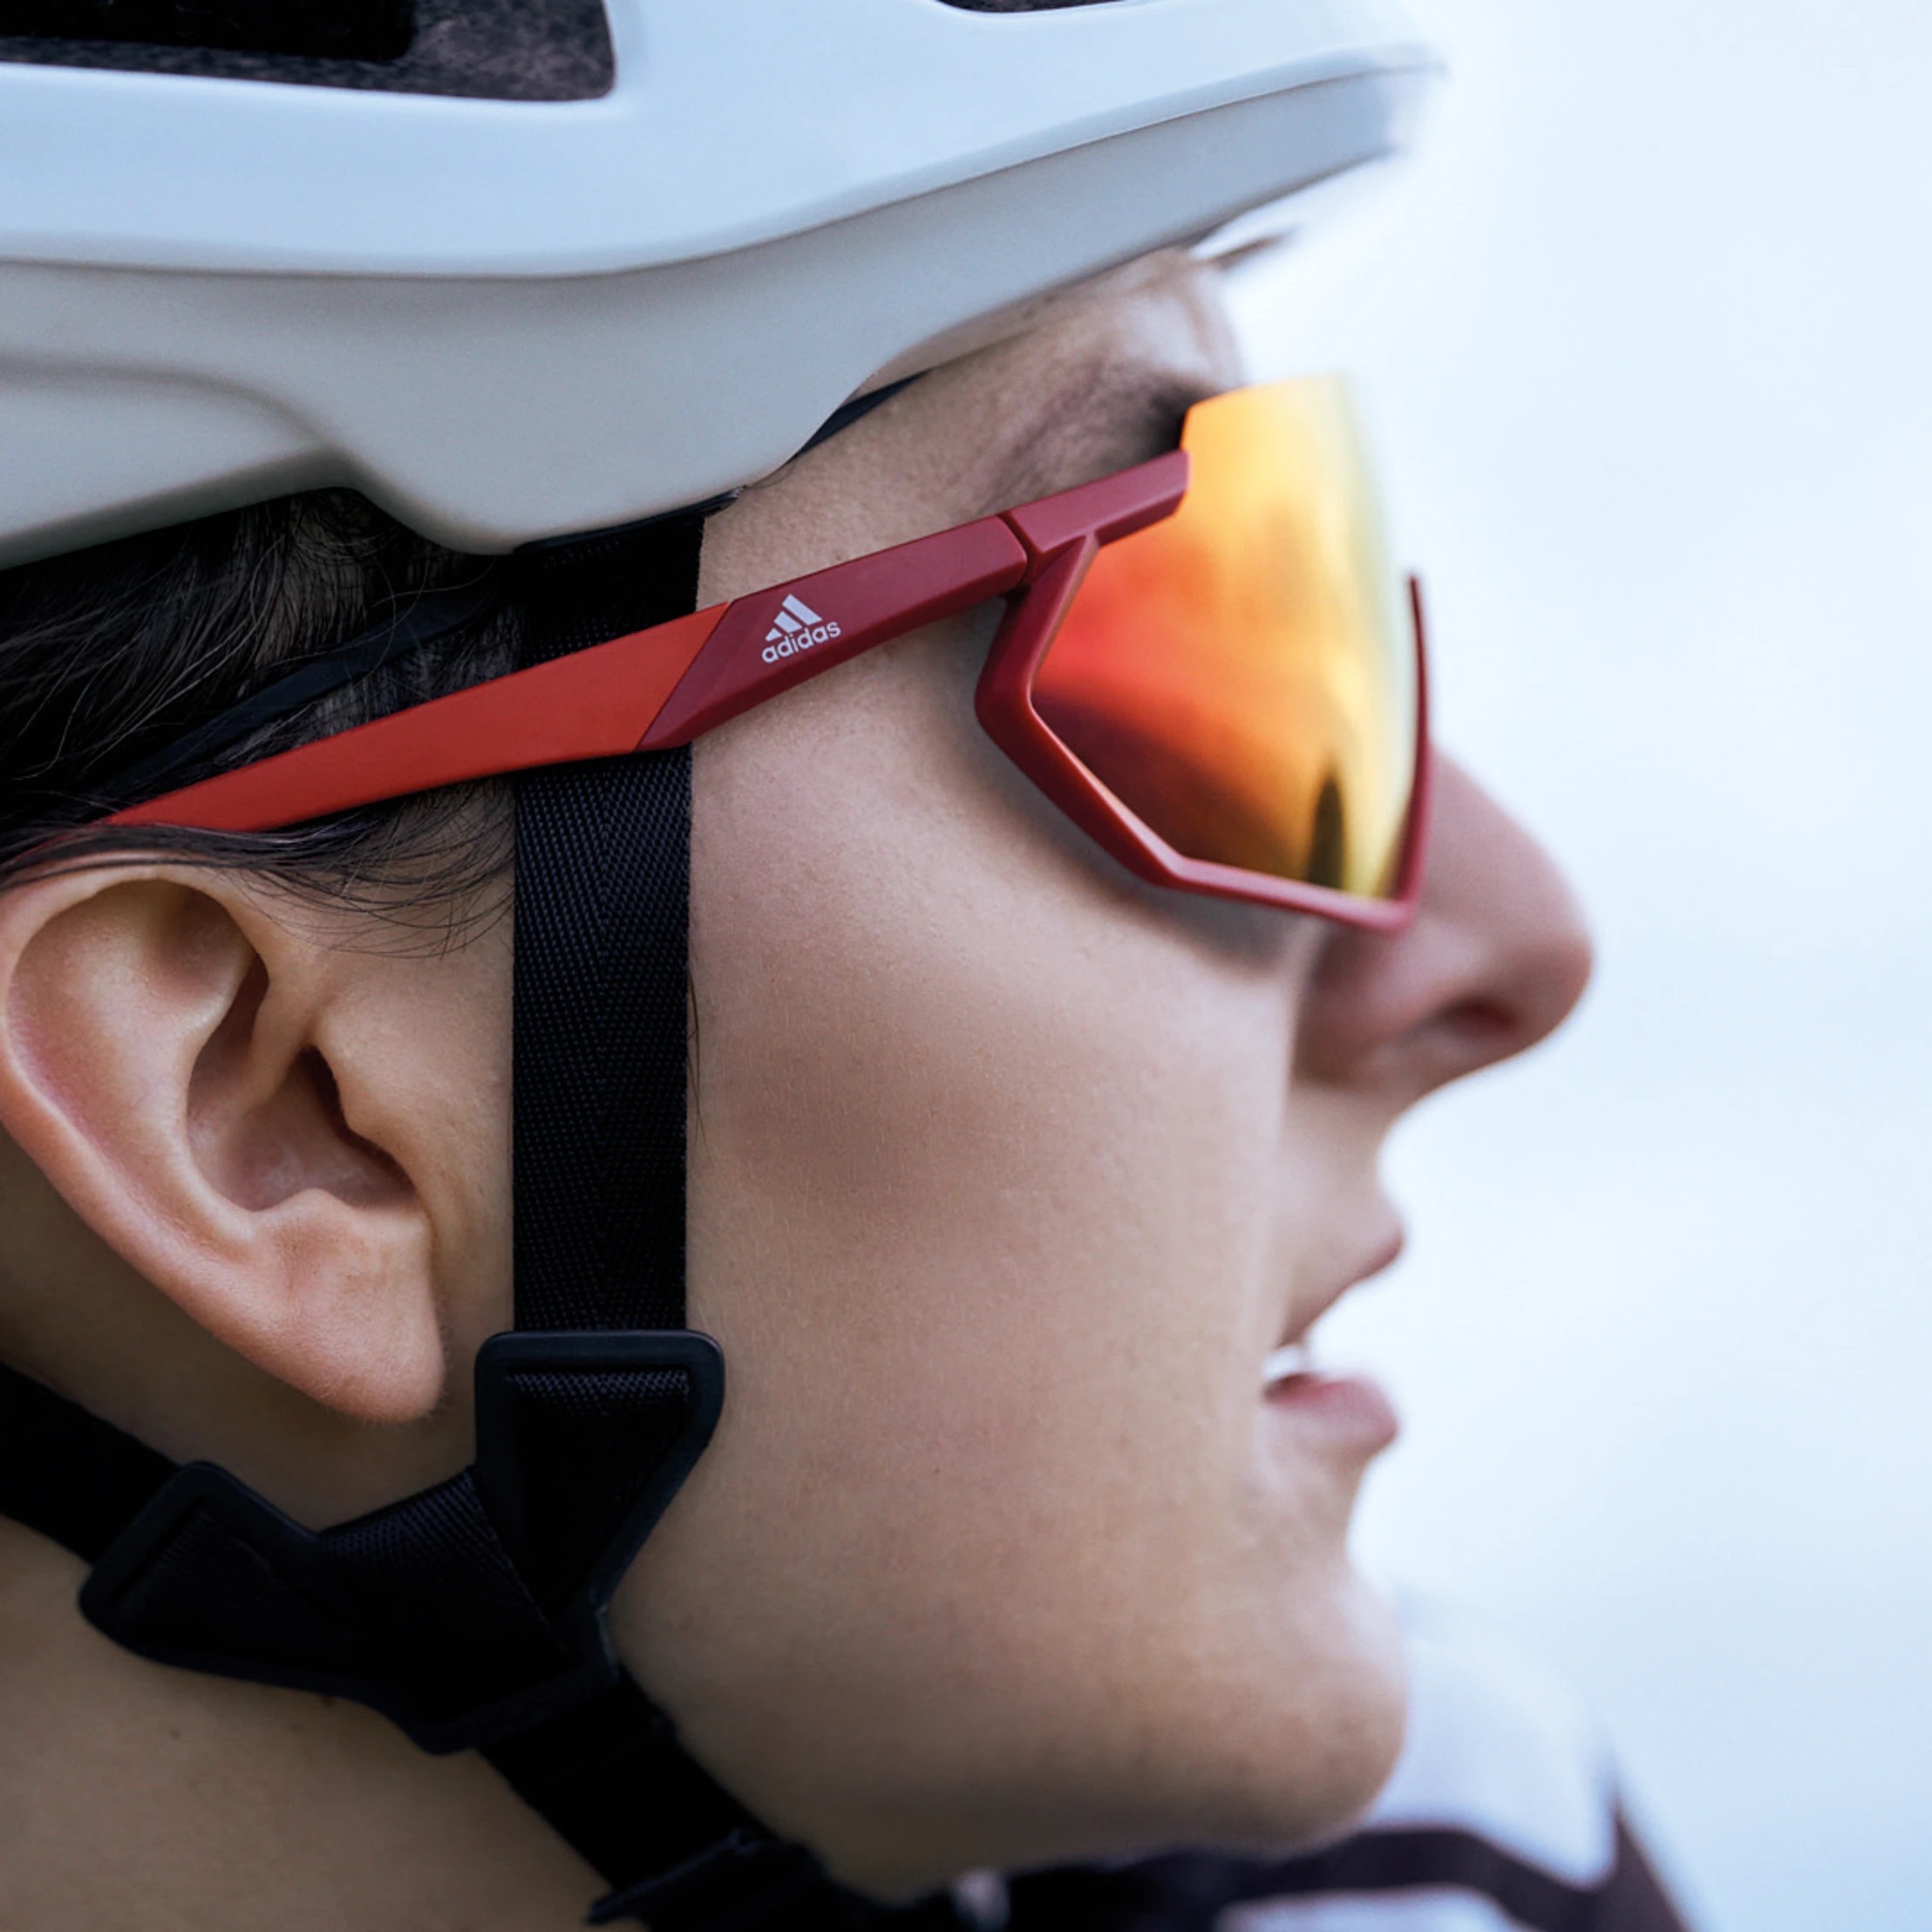 Agotamiento reptiles Armstrong Roundup: New cycling sunglasses from Adidas, KOO and 100% are ready to ride  - Bikerumor